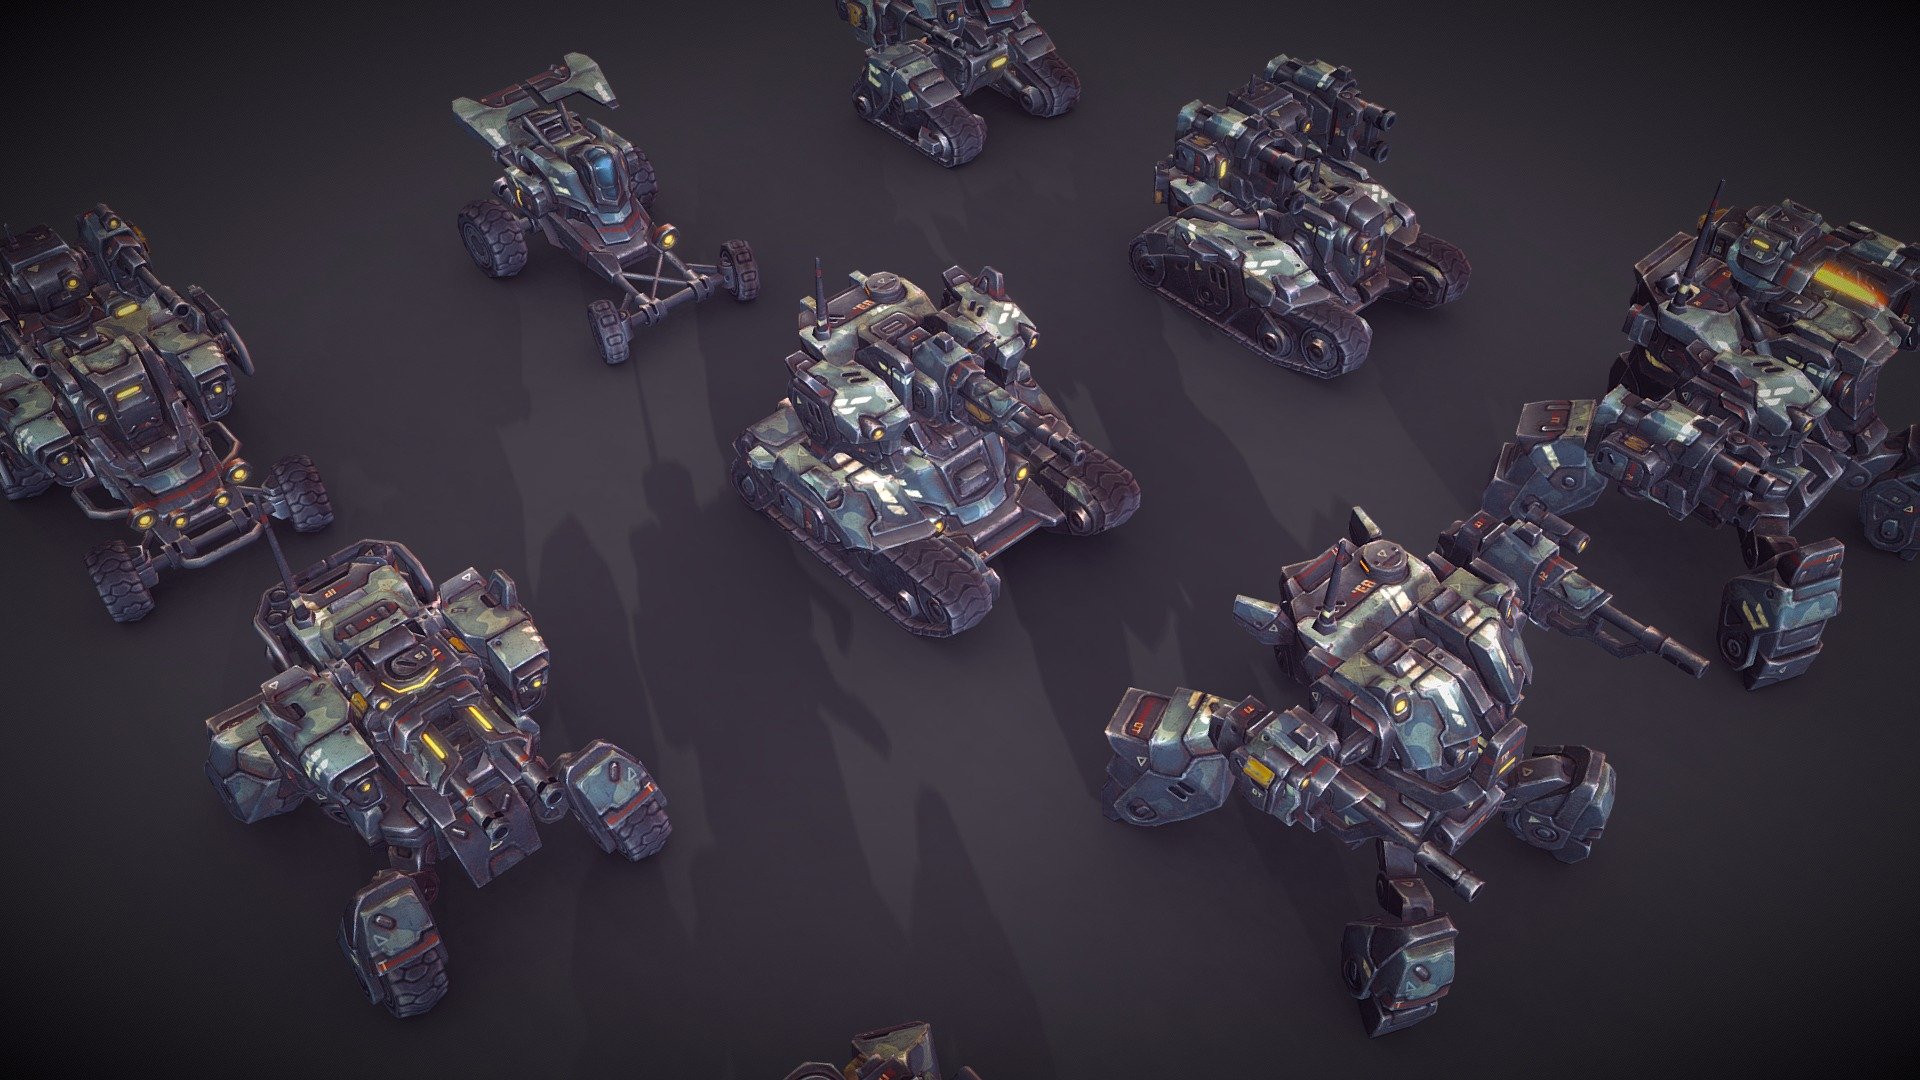 Mech Constructor: Spiders and Tanks